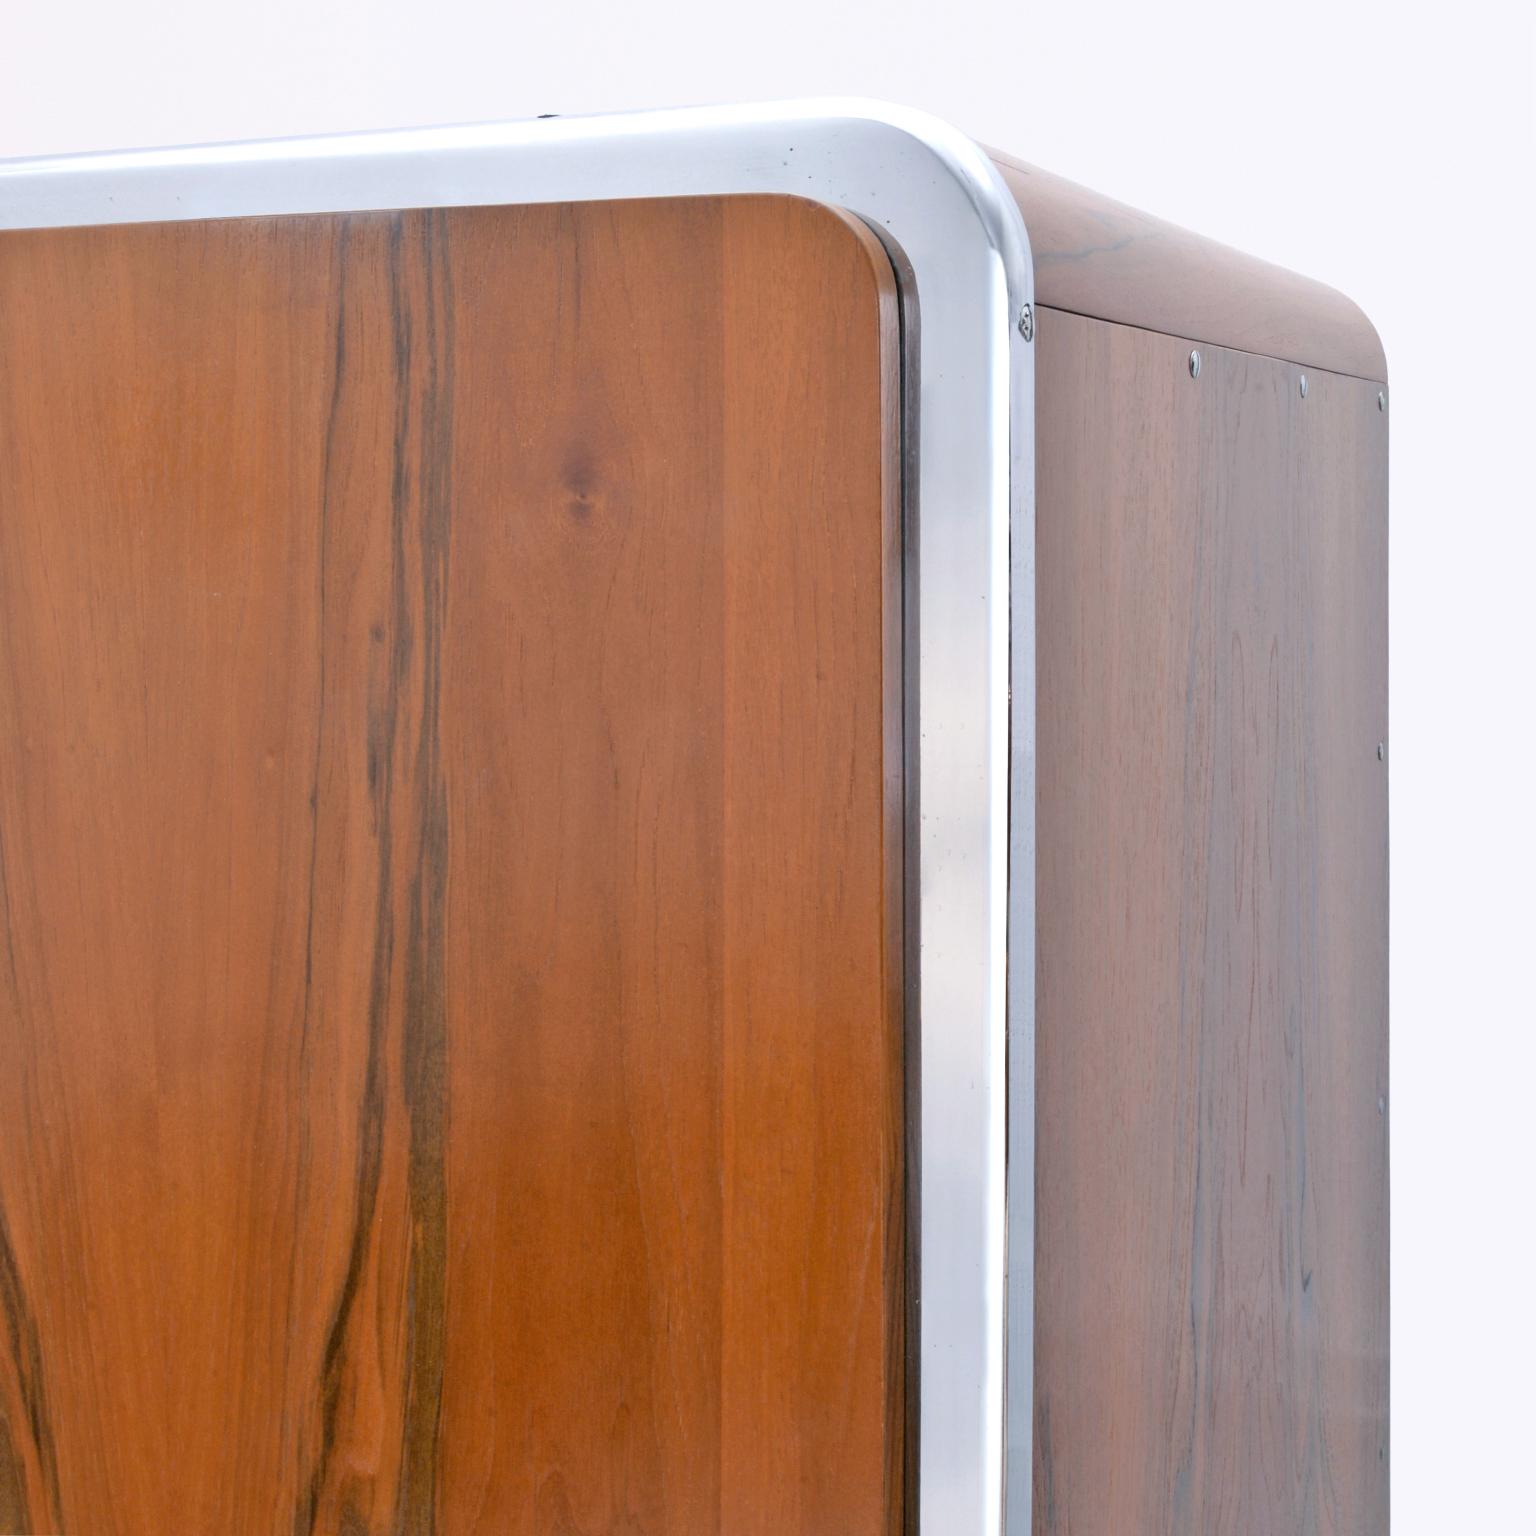 Czech Modernist Cabinet Made Of Chrome Plated Metal And Walnut Veneer, c. 1930 For Sale